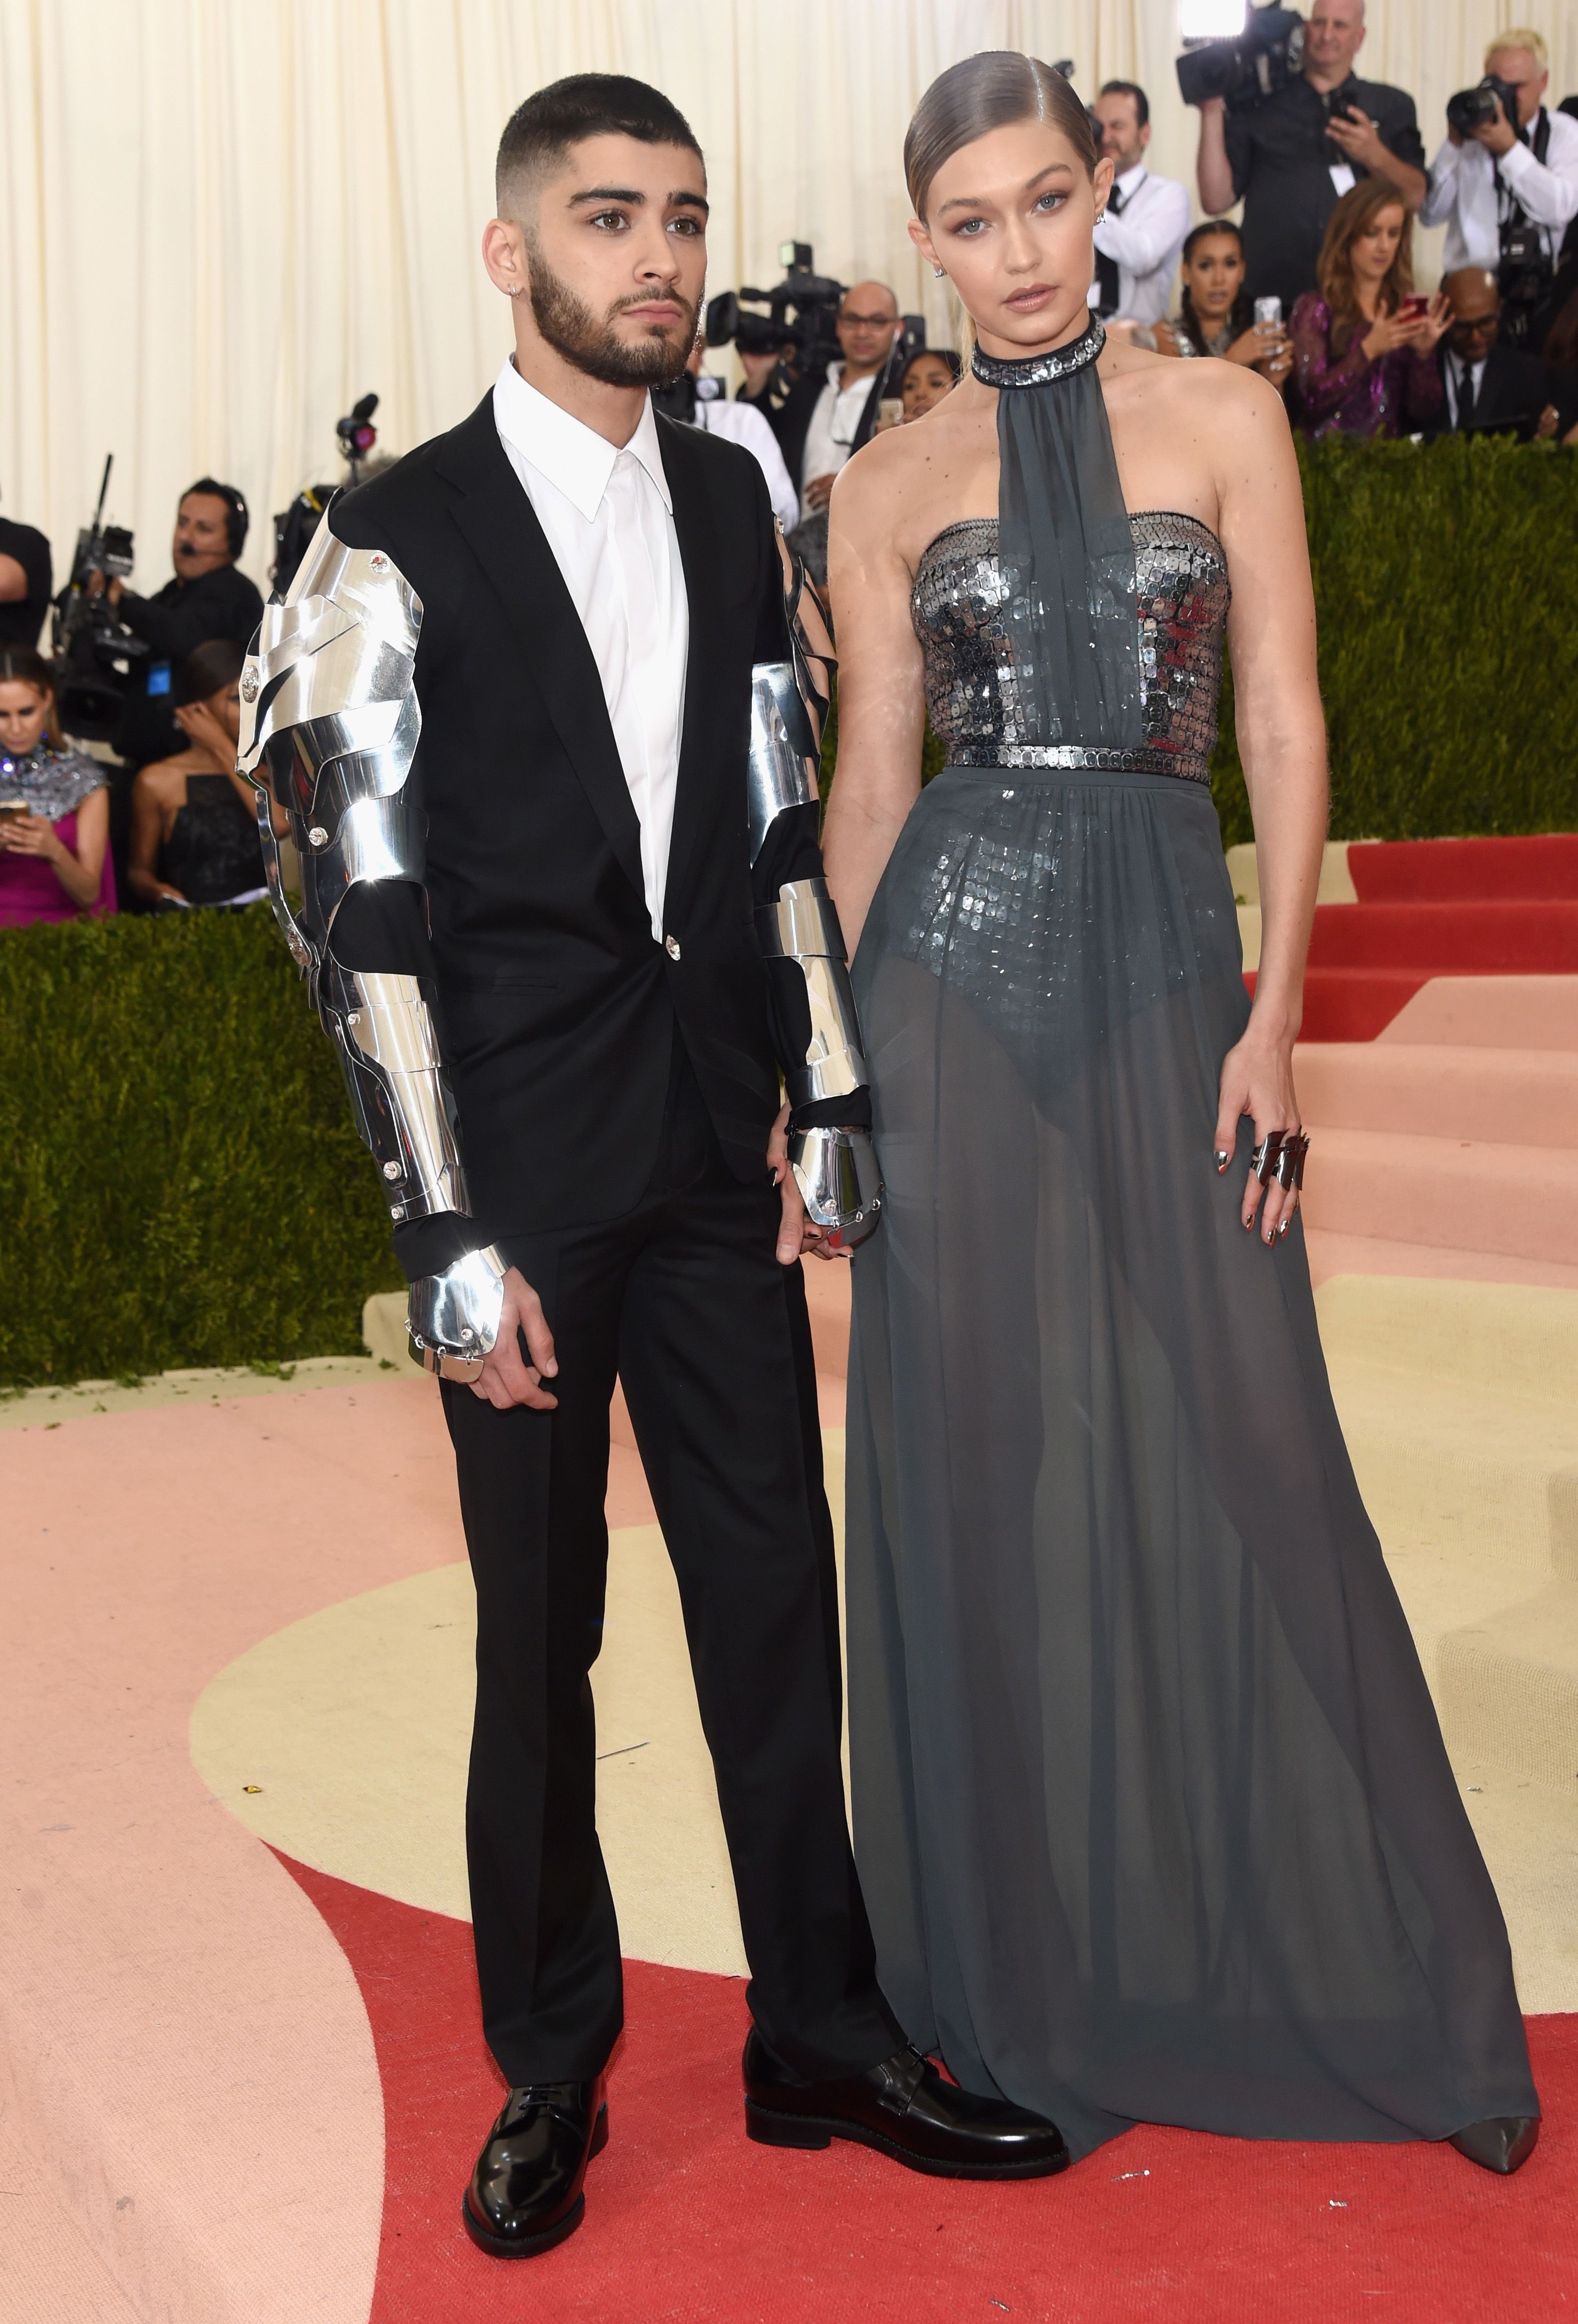 Gigi Hadid and Zayn Malik Are a Literal Robot in Love at the Met Gala